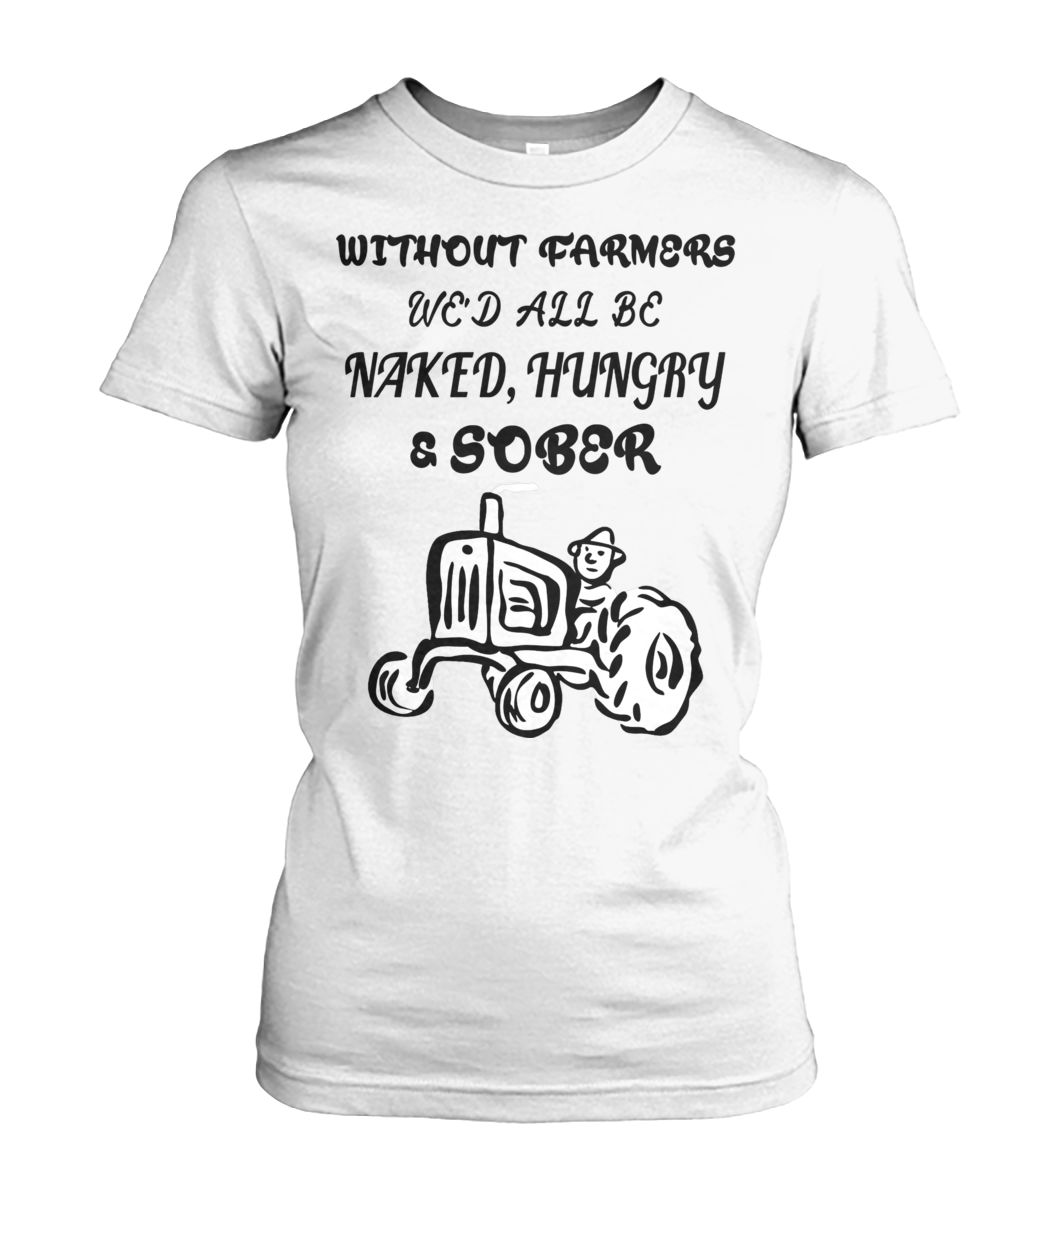 Without farmers we'd all be naked hungry sober women's crew tee